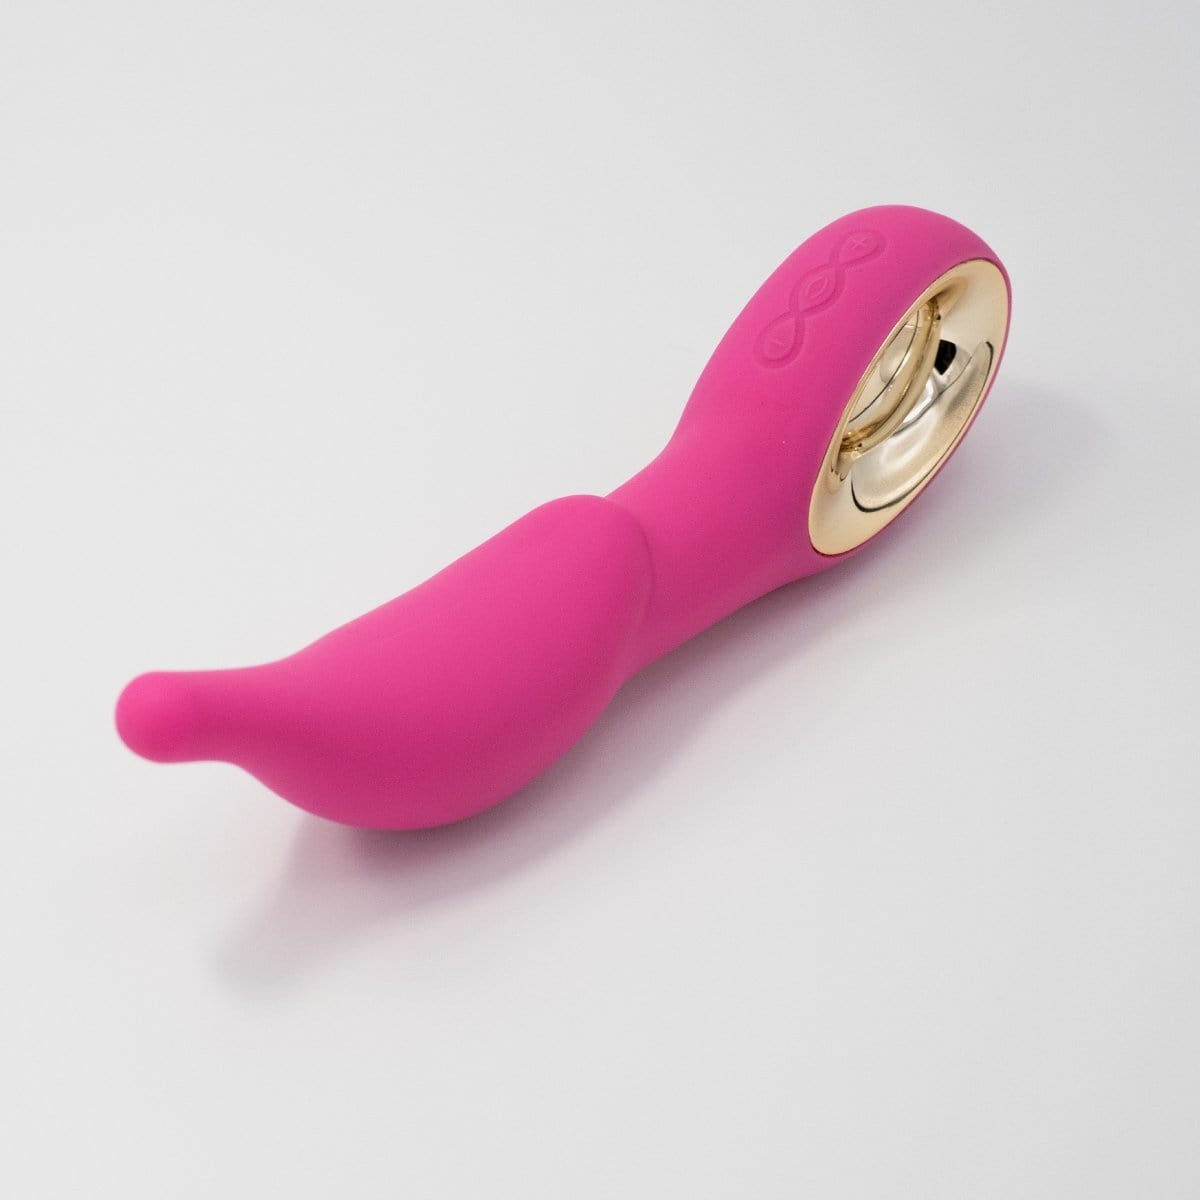 Super Dolphin G-spot Vibrator - Thorn & Feather